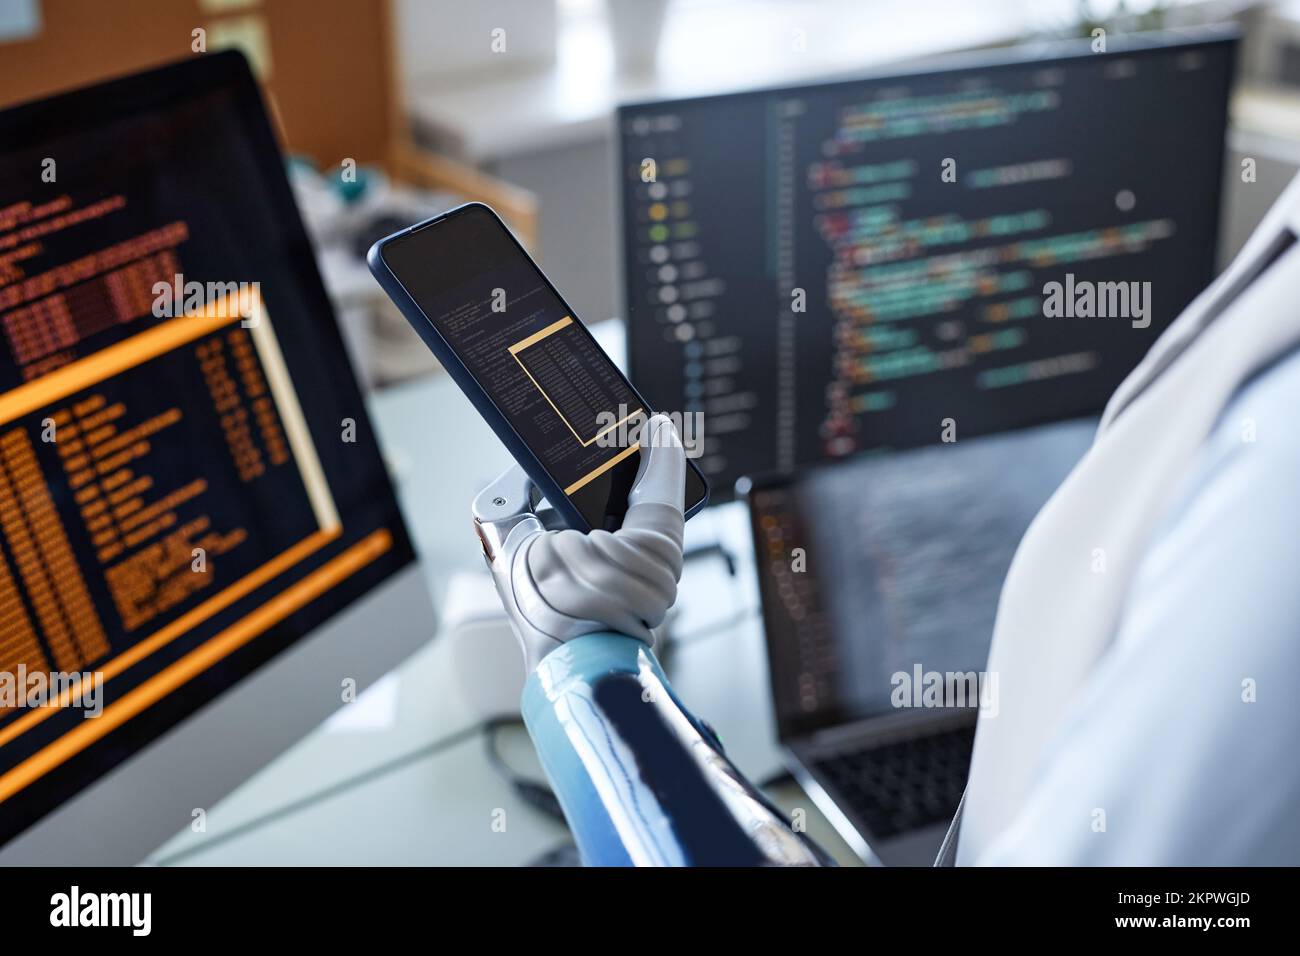 Closeup image of software developer with prosthetic arm testing code on smartphone Stock Photo